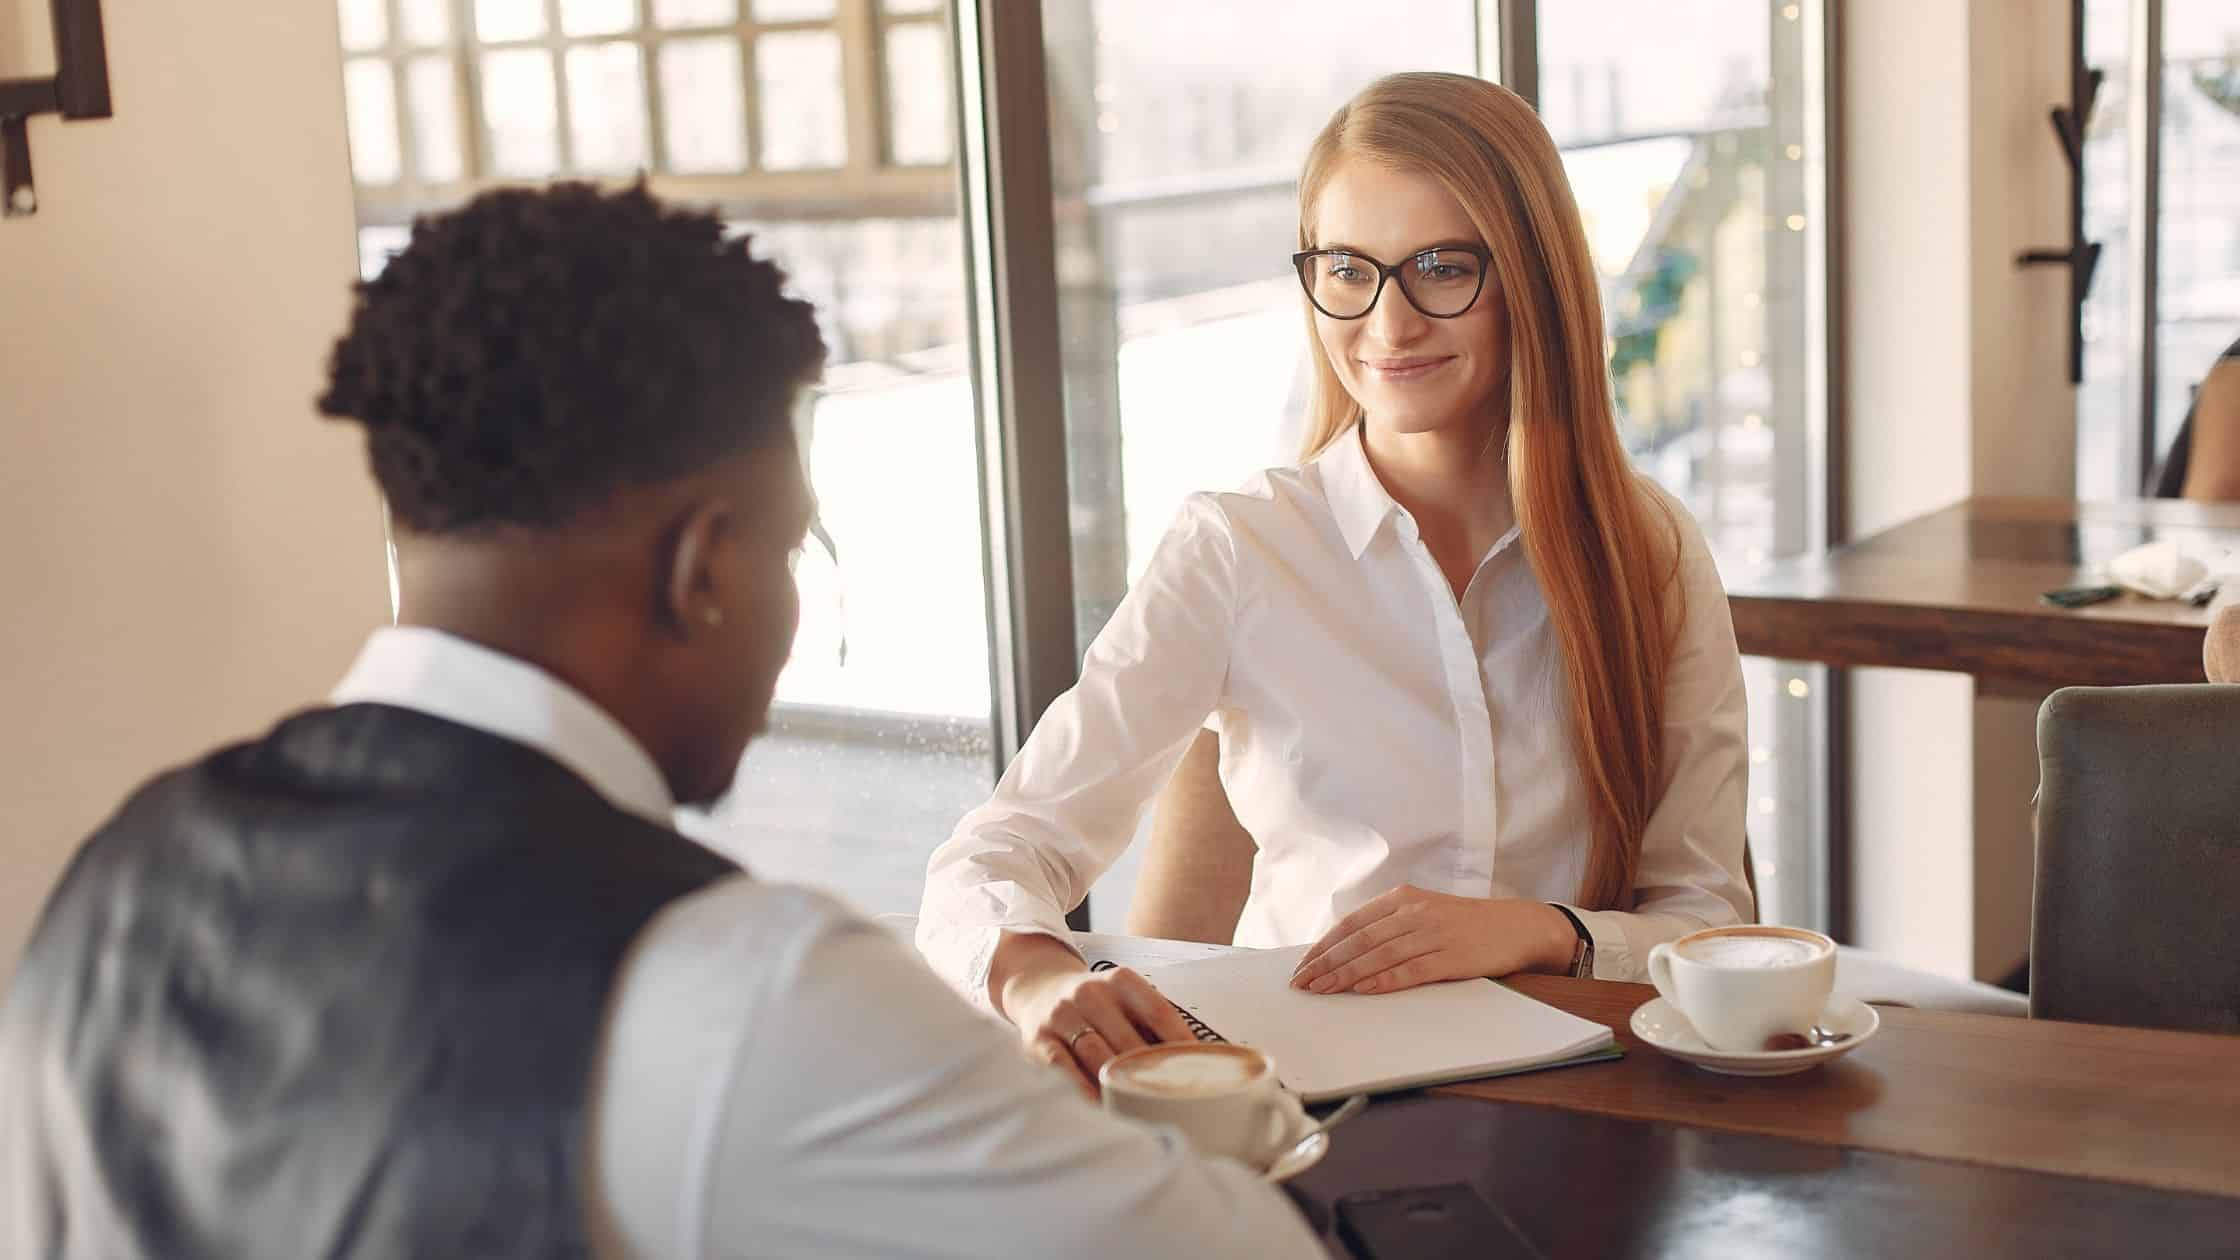 How to prepare for a successful second interview. Tips, advice, and questions to ask.